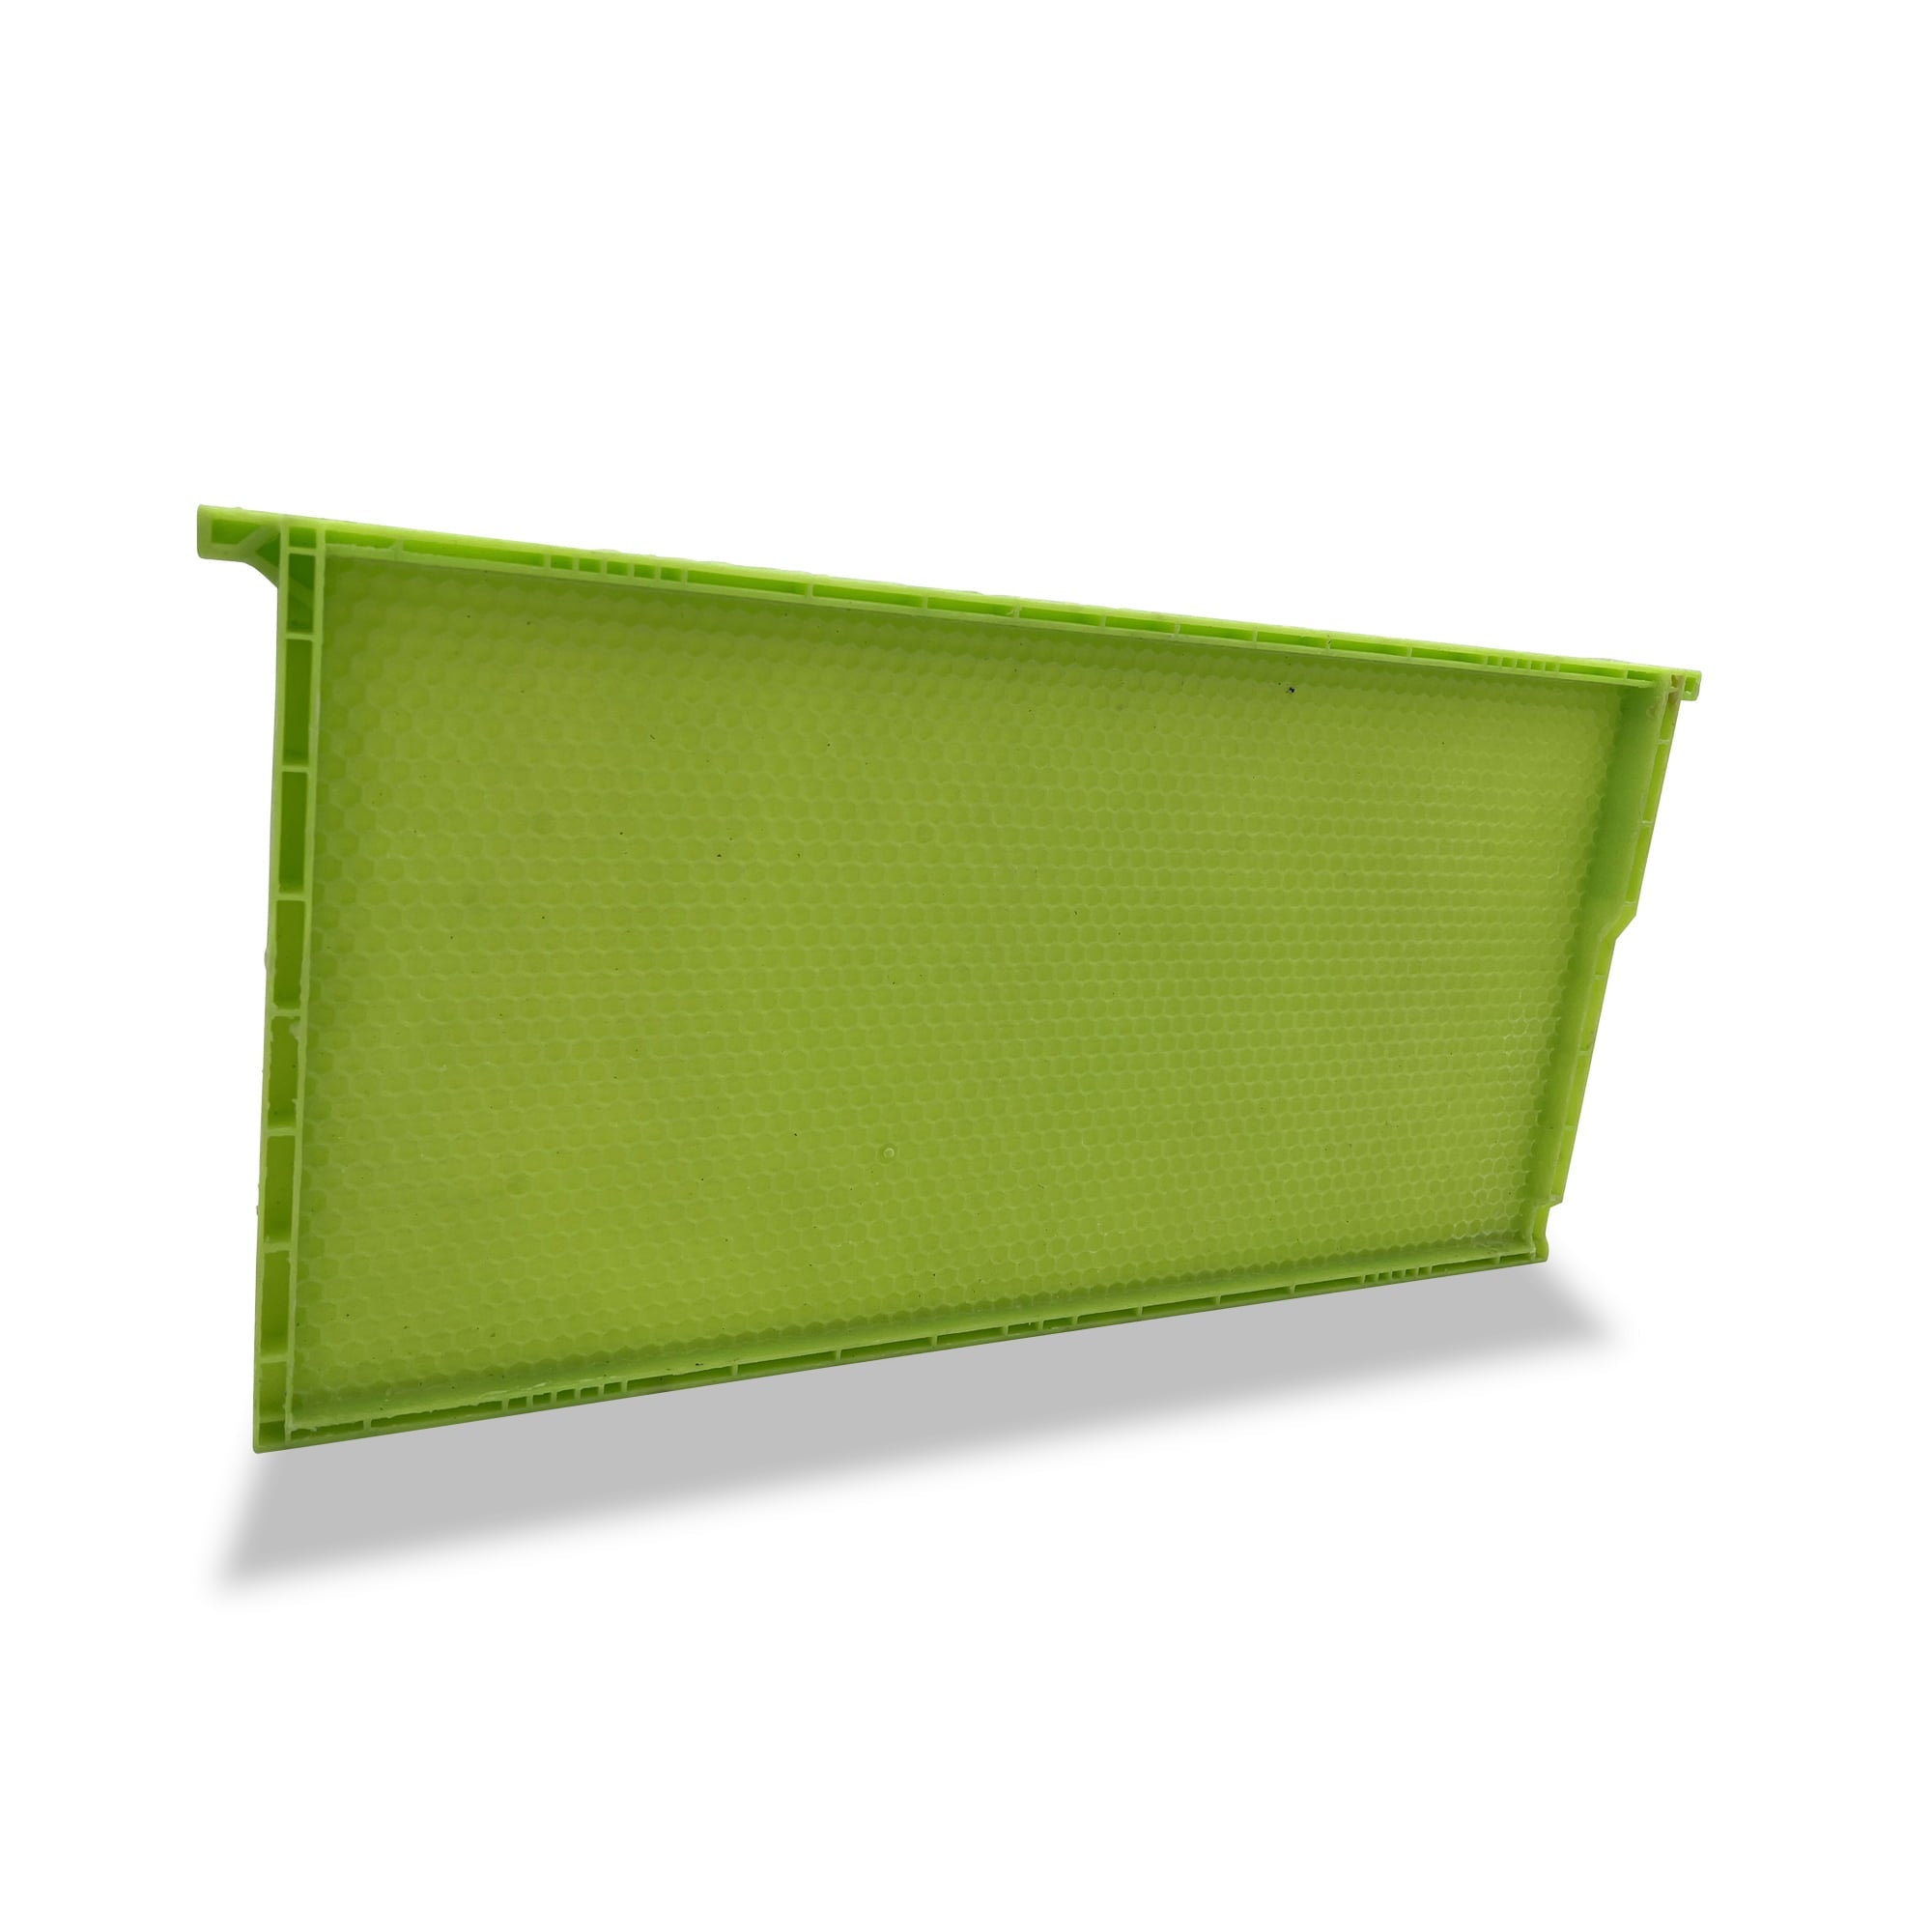 Green Drone Comb Frame For beekeeping